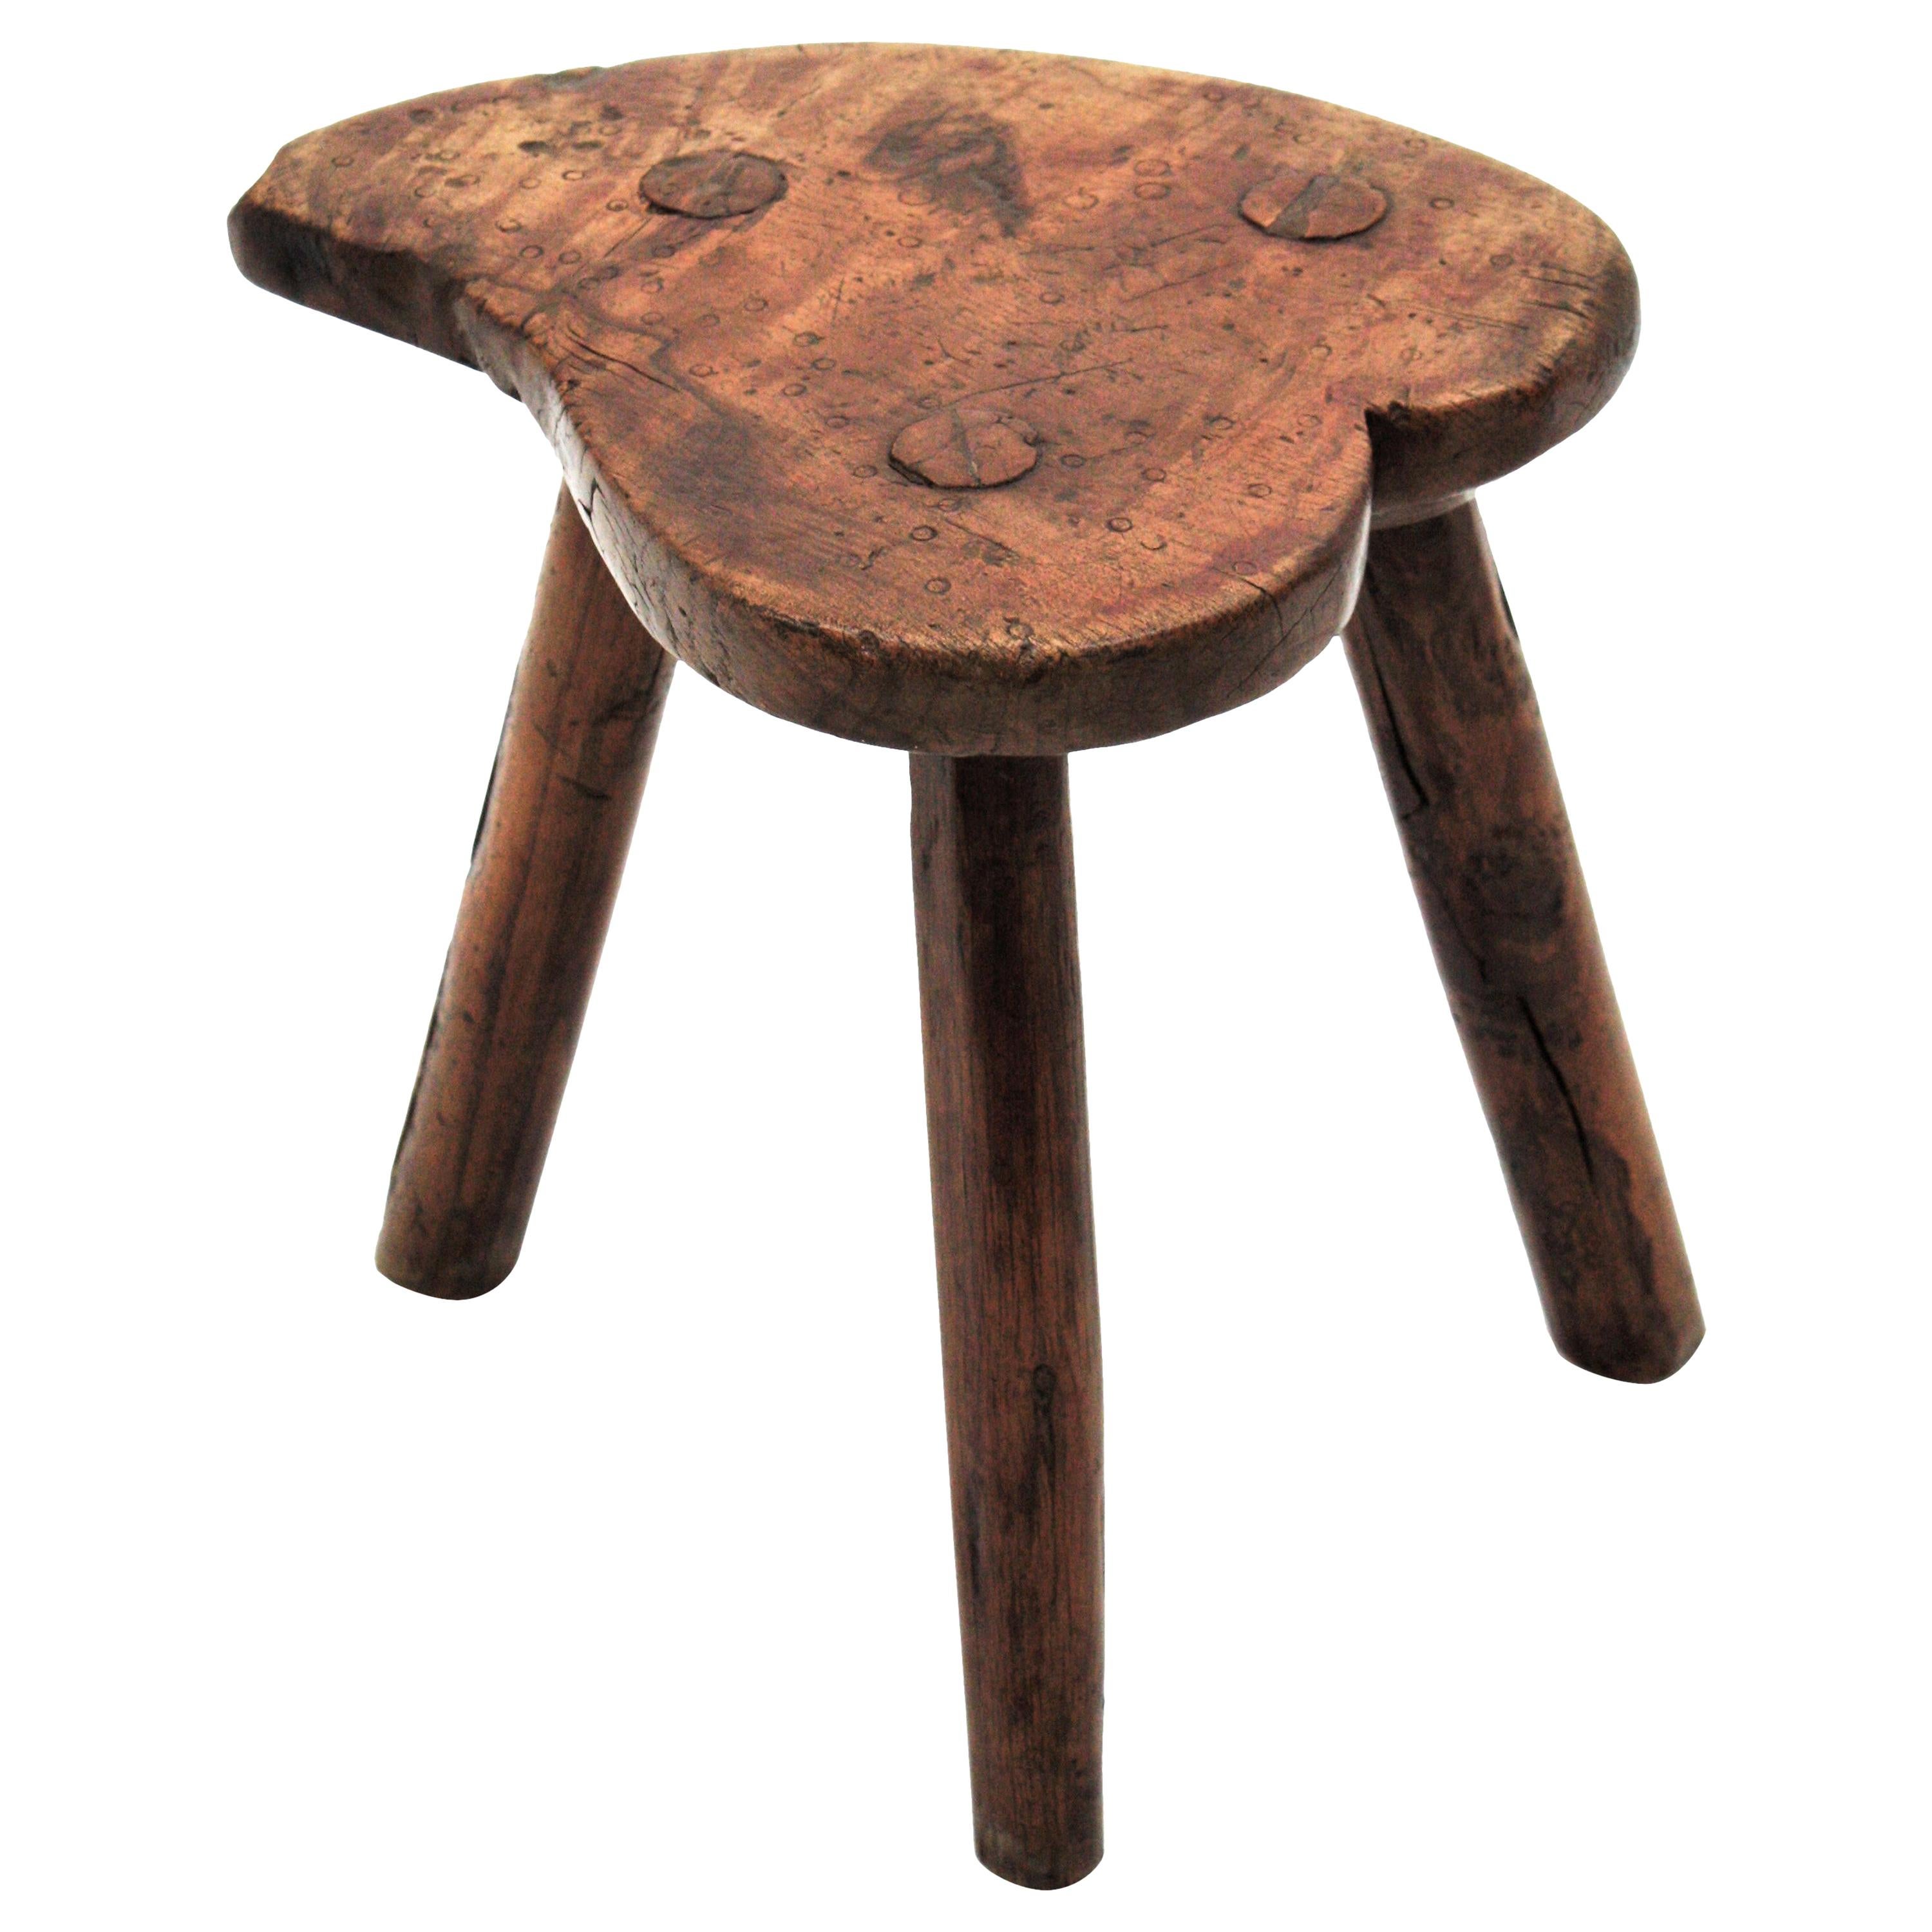 Primitive Heart Shaped Olive Wood Stool / Table from Spain